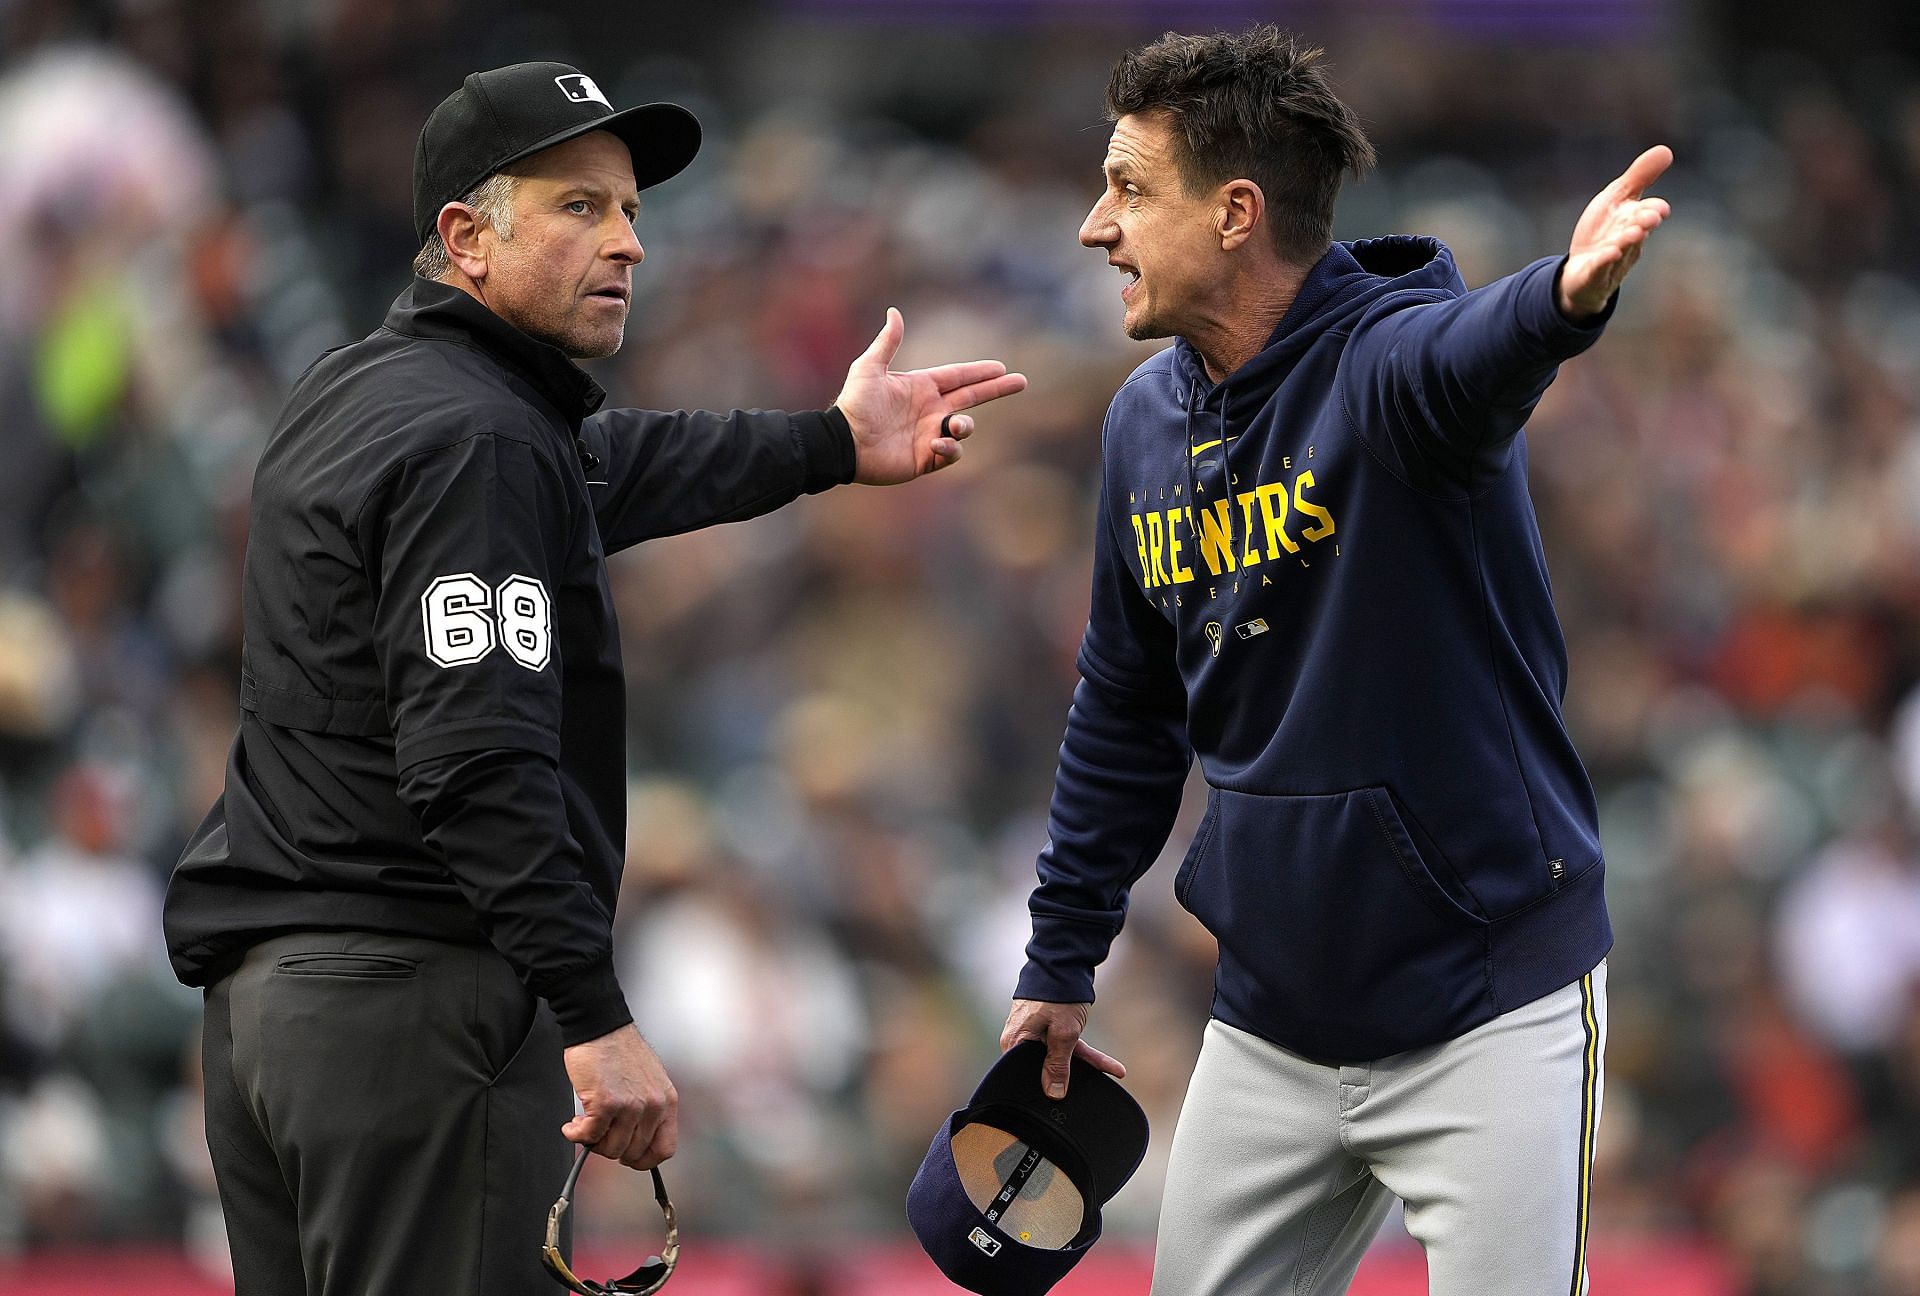 Craig Counsell on 10-7 loss, 06/01/2021